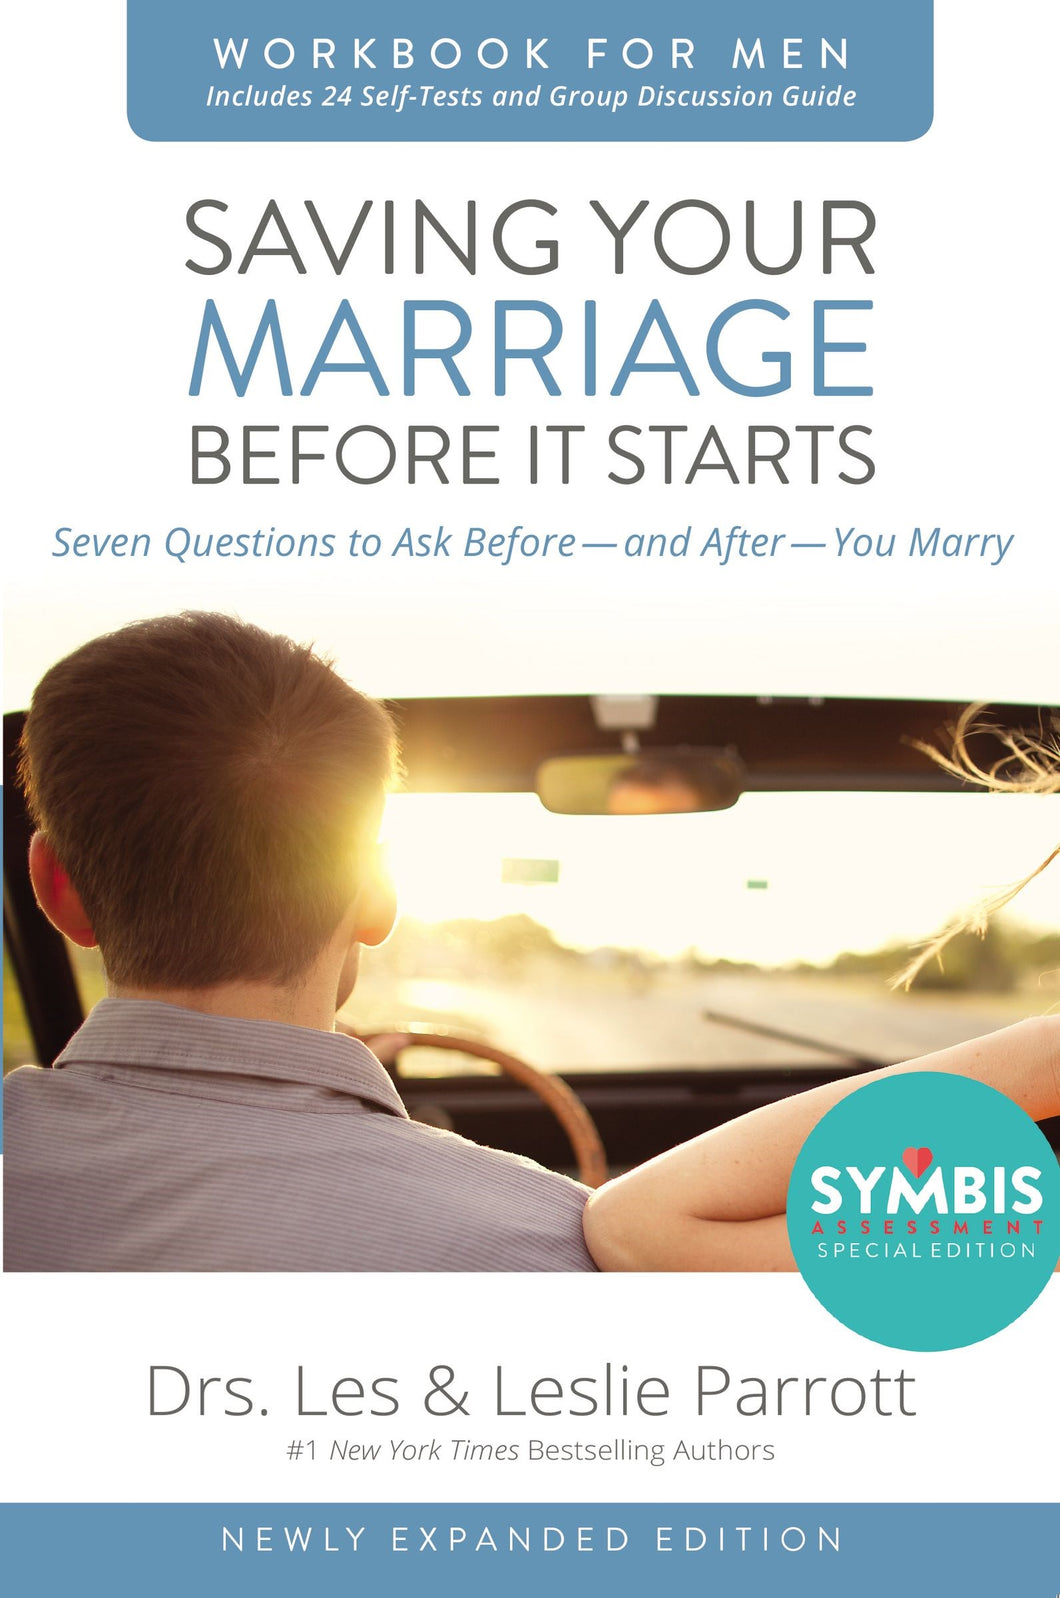 Saving Your Marriage Before It Starts Workbook For Men (Updated)